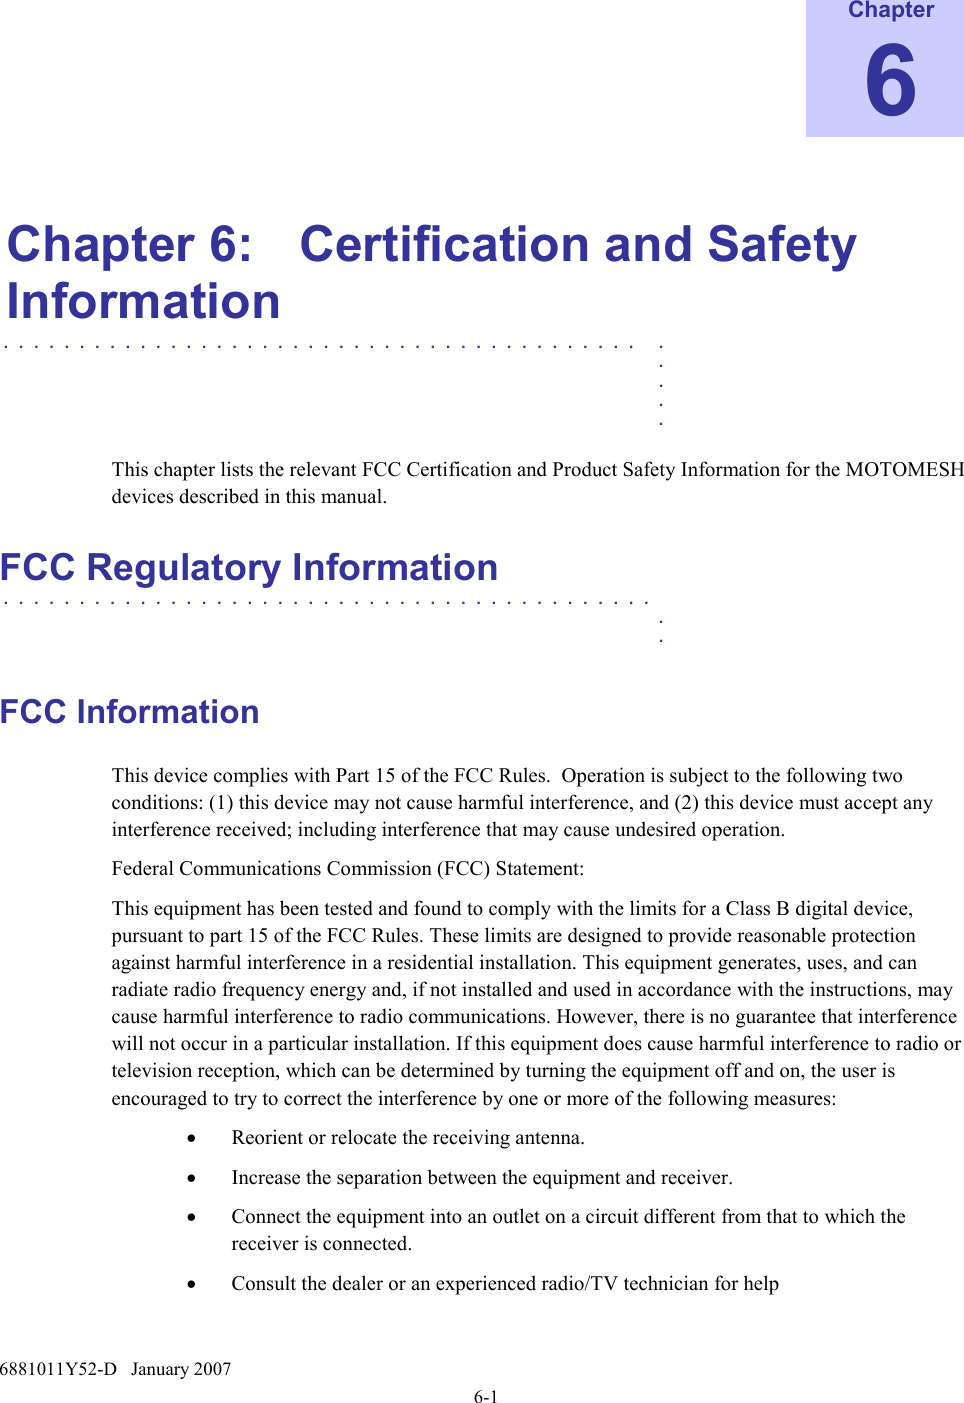  6881011Y52-D   January 2007 6-1 Chapter 6  Chapter 6:  Certification and Safety Information . . . . . . . . . . . . . . . . . . . . . . . . . . . . . . . . . . . . . . . . . . .    .    .    .    .  This chapter lists the relevant FCC Certification and Product Safety Information for the MOTOMESH devices described in this manual. FCC Regulatory Information . . . . . . . . . . . . . . . . . . . . . . . . . . . . . . . . . . . . . . . . . . .    .    .  FCC Information This device complies with Part 15 of the FCC Rules.  Operation is subject to the following two conditions: (1) this device may not cause harmful interference, and (2) this device must accept any interference received; including interference that may cause undesired operation. Federal Communications Commission (FCC) Statement: This equipment has been tested and found to comply with the limits for a Class B digital device, pursuant to part 15 of the FCC Rules. These limits are designed to provide reasonable protection against harmful interference in a residential installation. This equipment generates, uses, and can radiate radio frequency energy and, if not installed and used in accordance with the instructions, may cause harmful interference to radio communications. However, there is no guarantee that interference will not occur in a particular installation. If this equipment does cause harmful interference to radio or television reception, which can be determined by turning the equipment off and on, the user is encouraged to try to correct the interference by one or more of the following measures:  • Reorient or relocate the receiving antenna. • Increase the separation between the equipment and receiver. • Connect the equipment into an outlet on a circuit different from that to which the receiver is connected. • Consult the dealer or an experienced radio/TV technician for help  